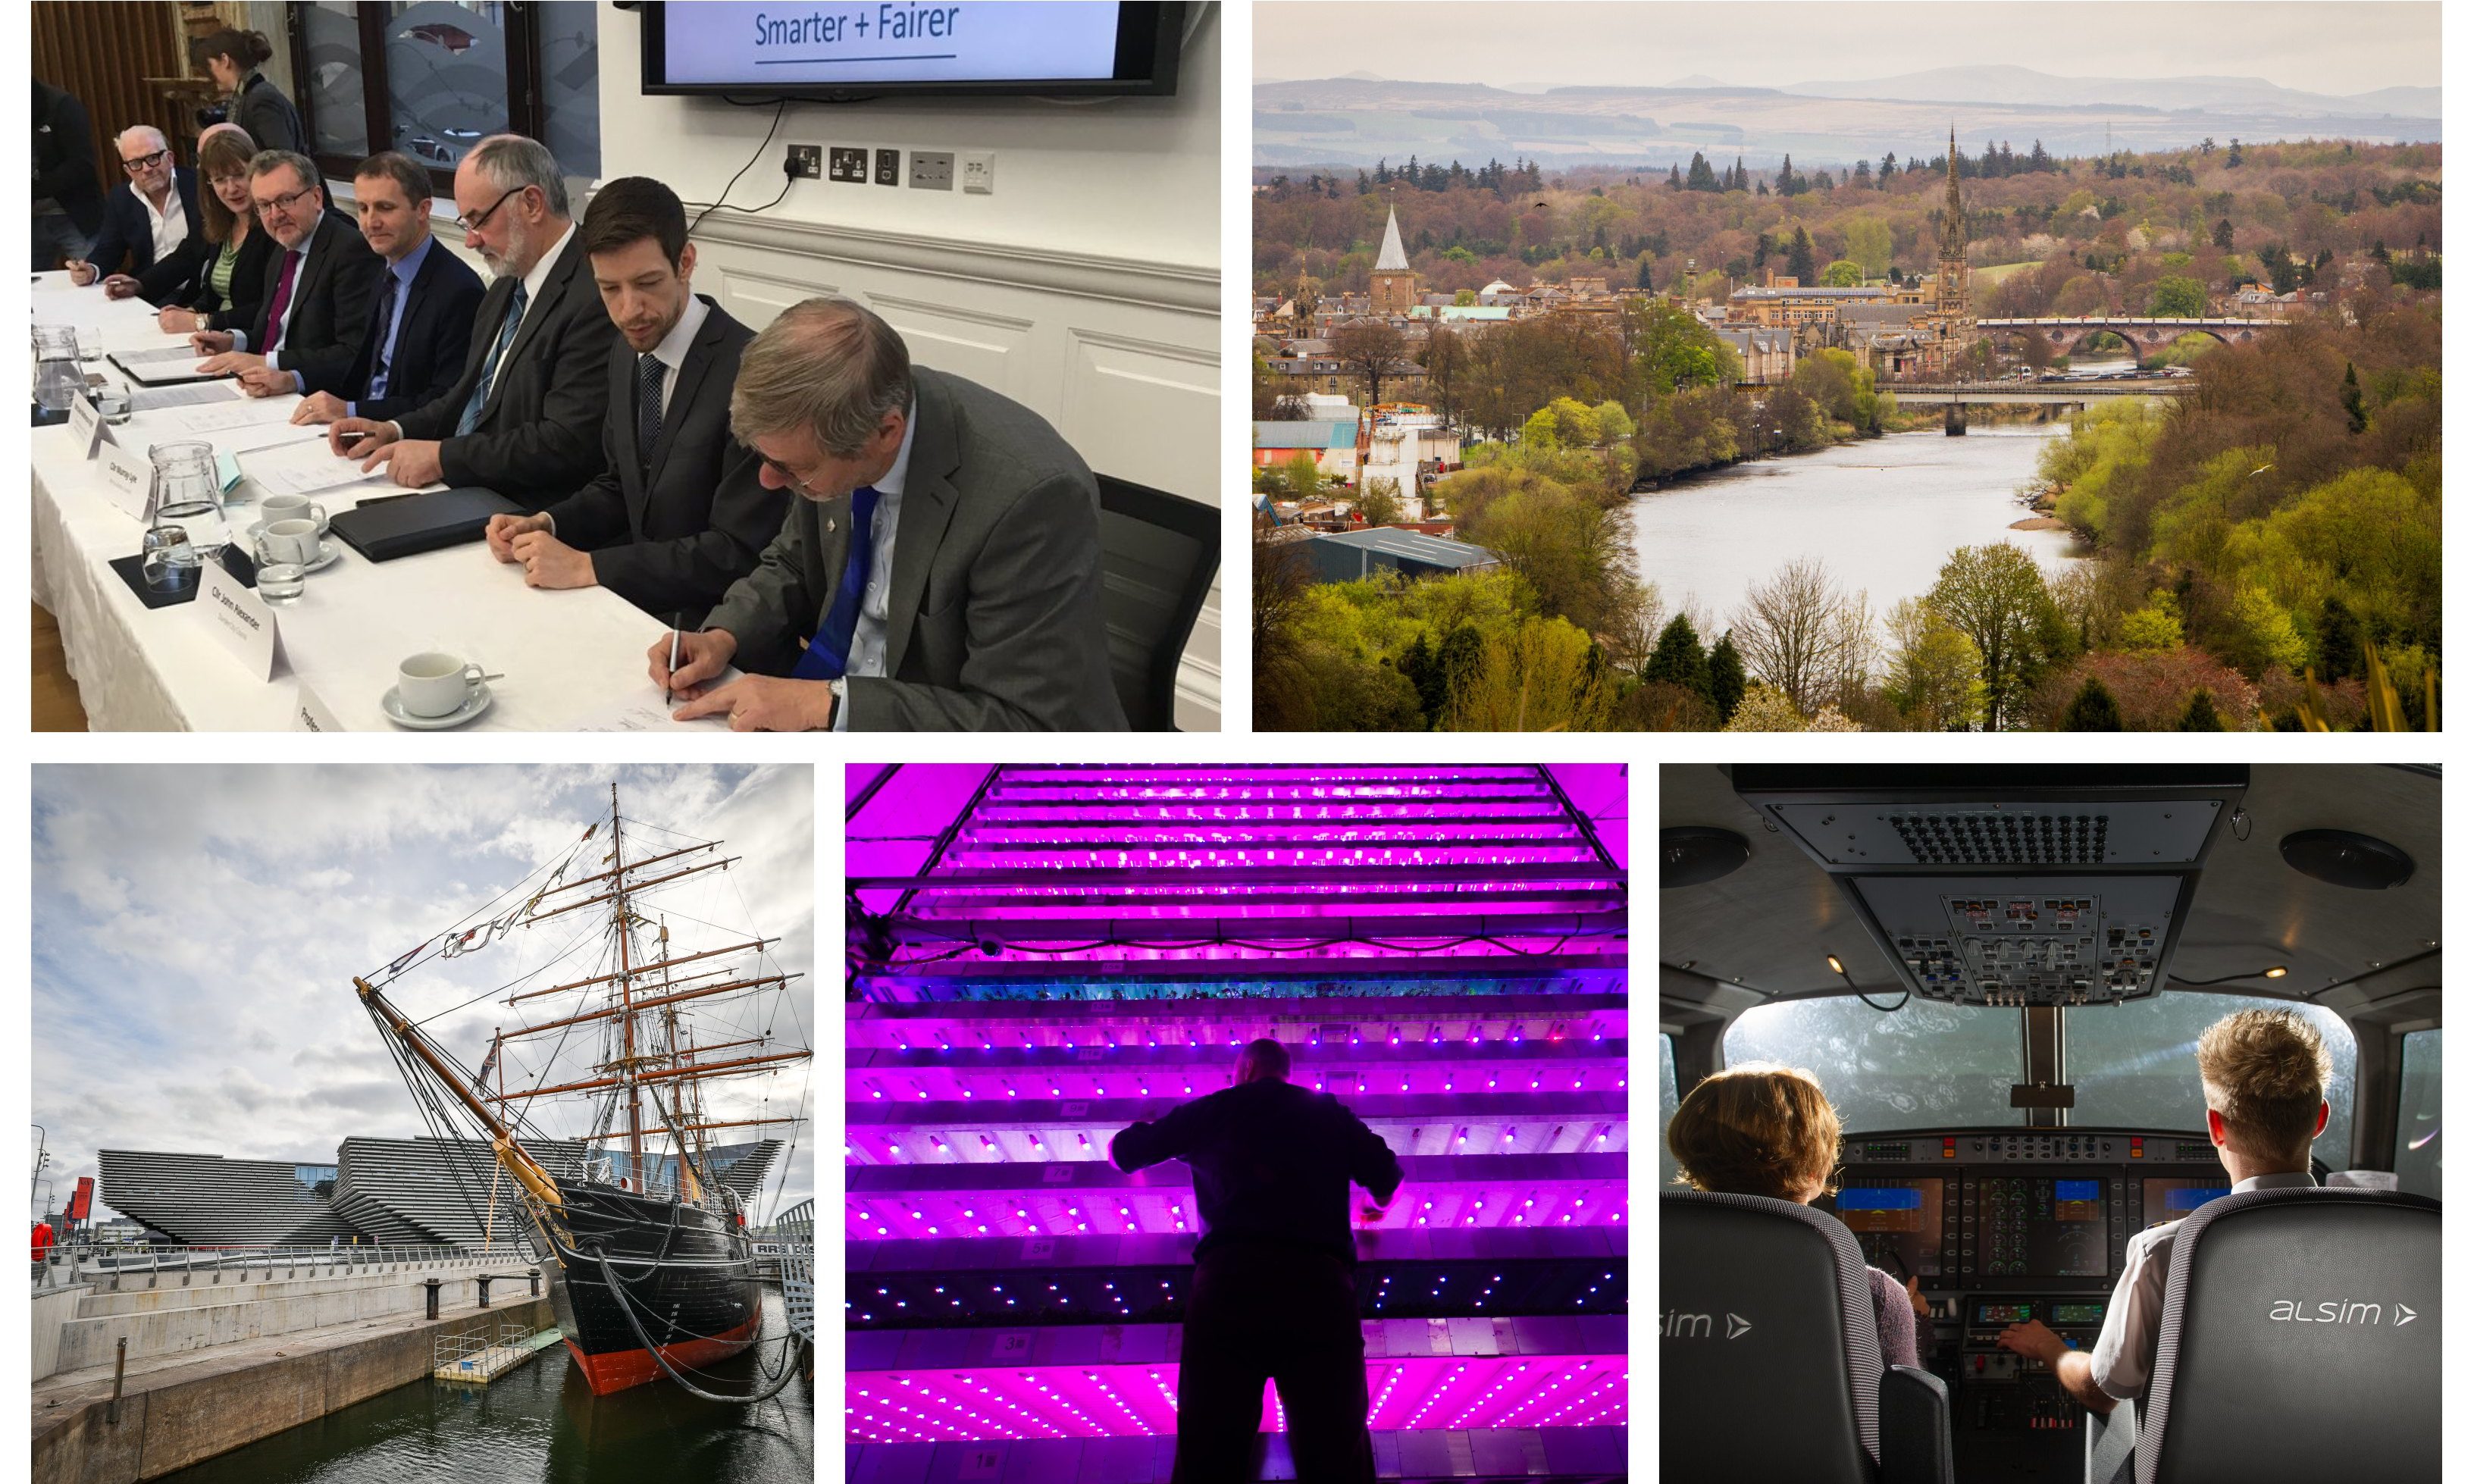 The Tay Cities Deal will invest in, among other things, tourism across Tayside and Fife, the James Hutton Institute in Invergowire (bottom middle) and aviation.